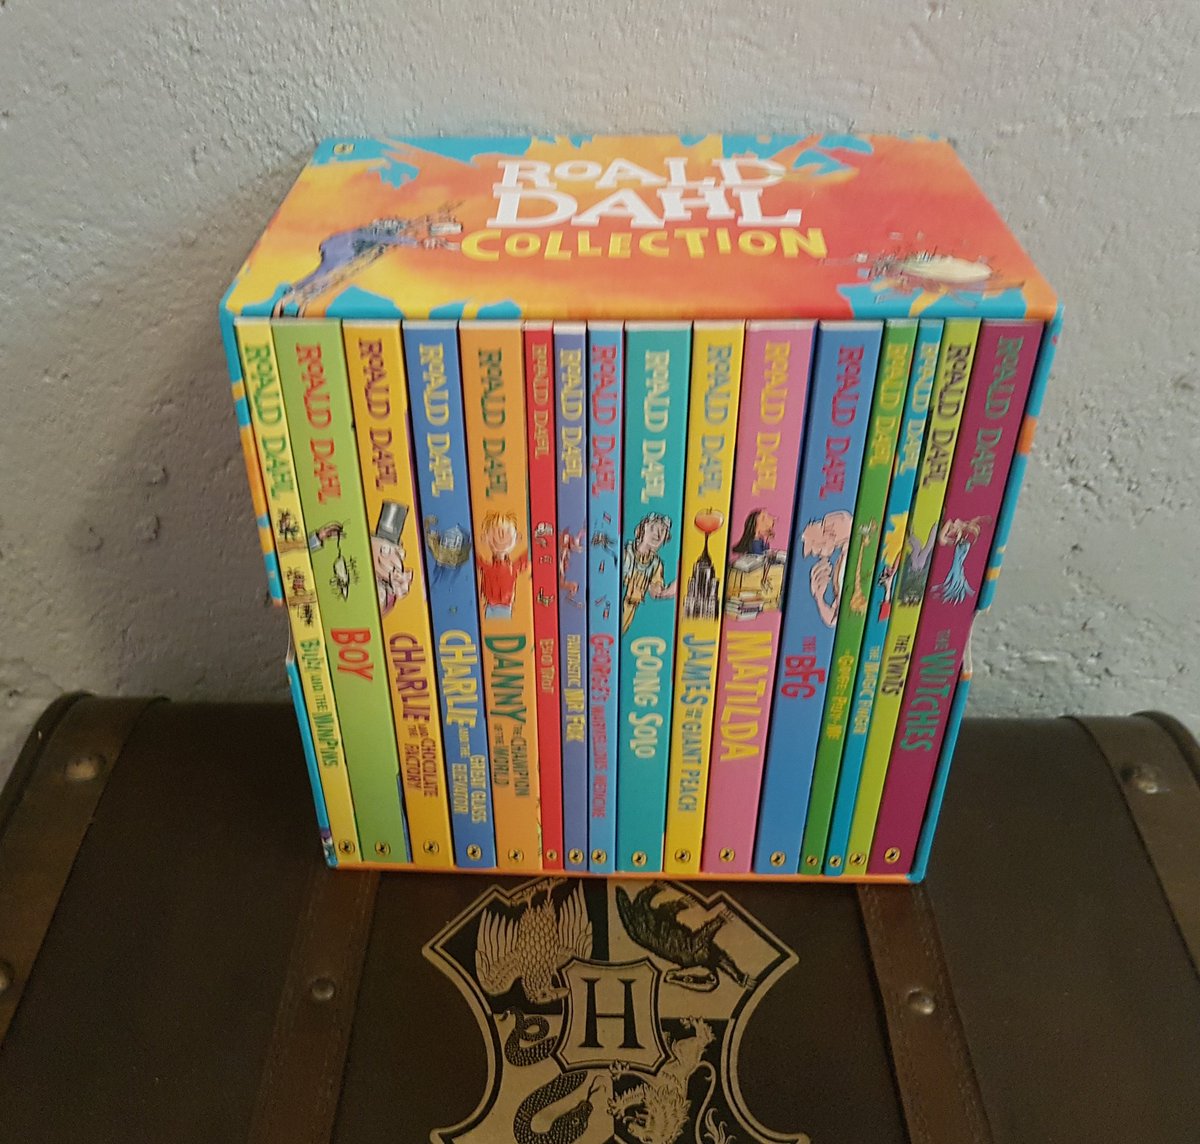 Been on a #RescueMission
If you want to change the words in these books, you're gonna have to pry them from my cold dead hands! 
#TheRoaldDahlCollection
#RoaldDahl
#QuentinBlake
#puffinbooks 
📖📚